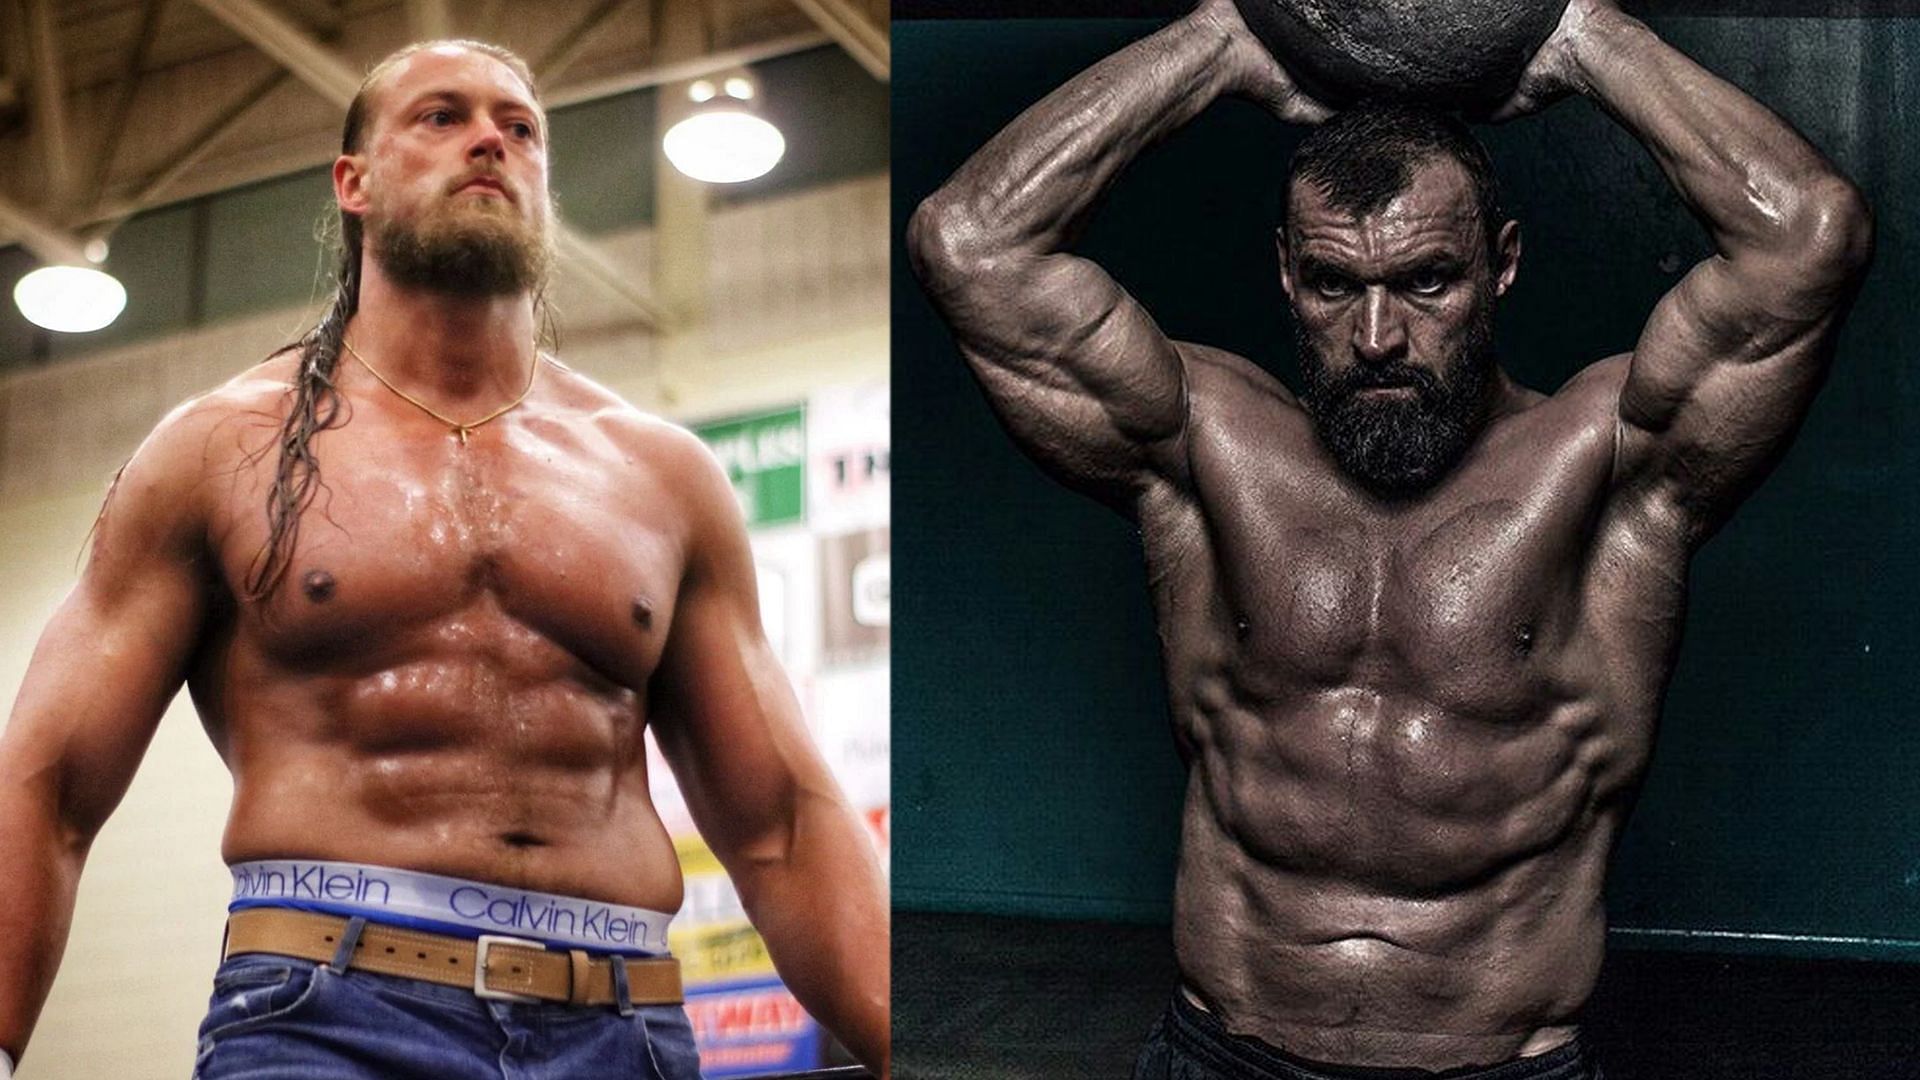 Some former WWE Superstars look completely unrecognizable now